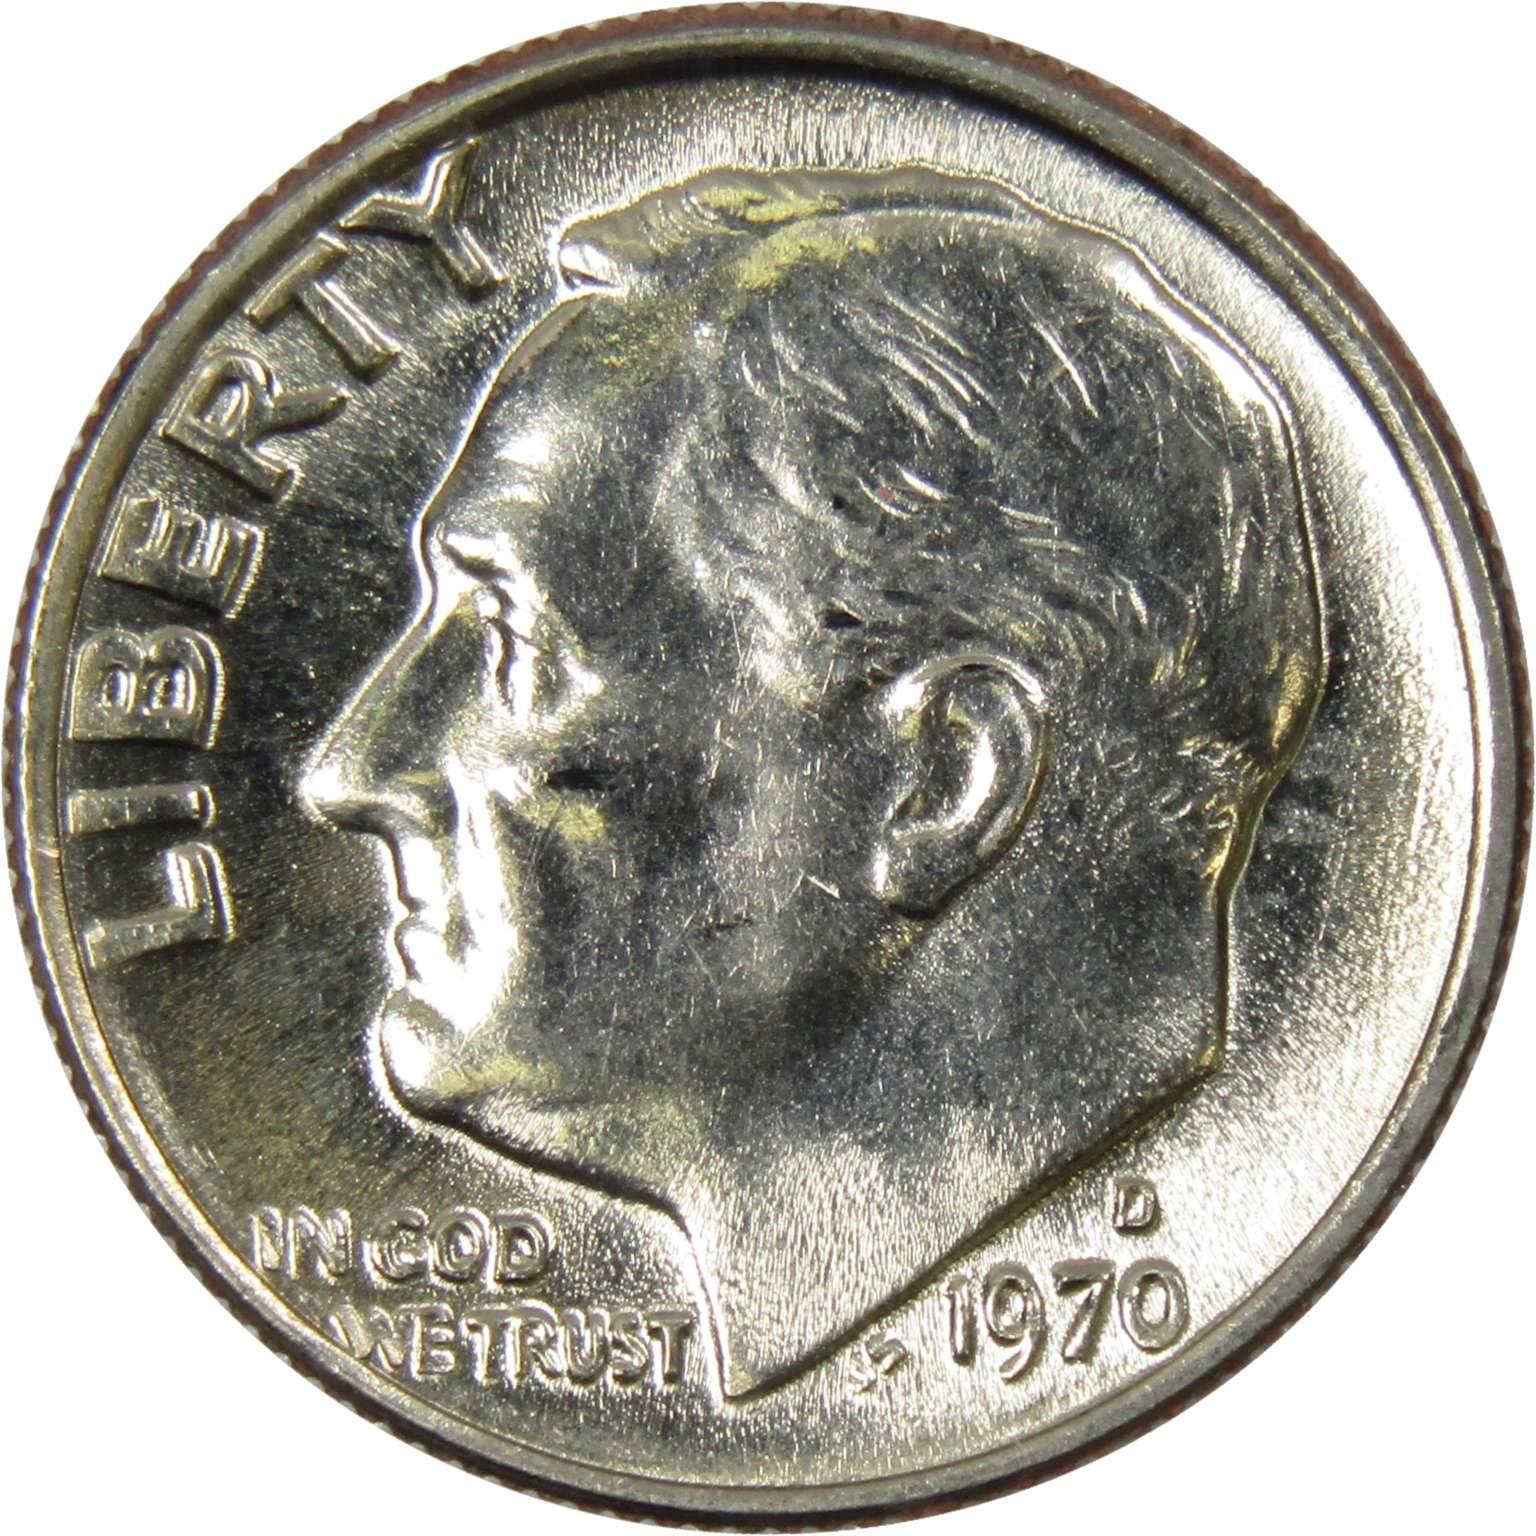 1970 D Roosevelt Dime BU Uncirculated Mint State 10c US Coin Collectible